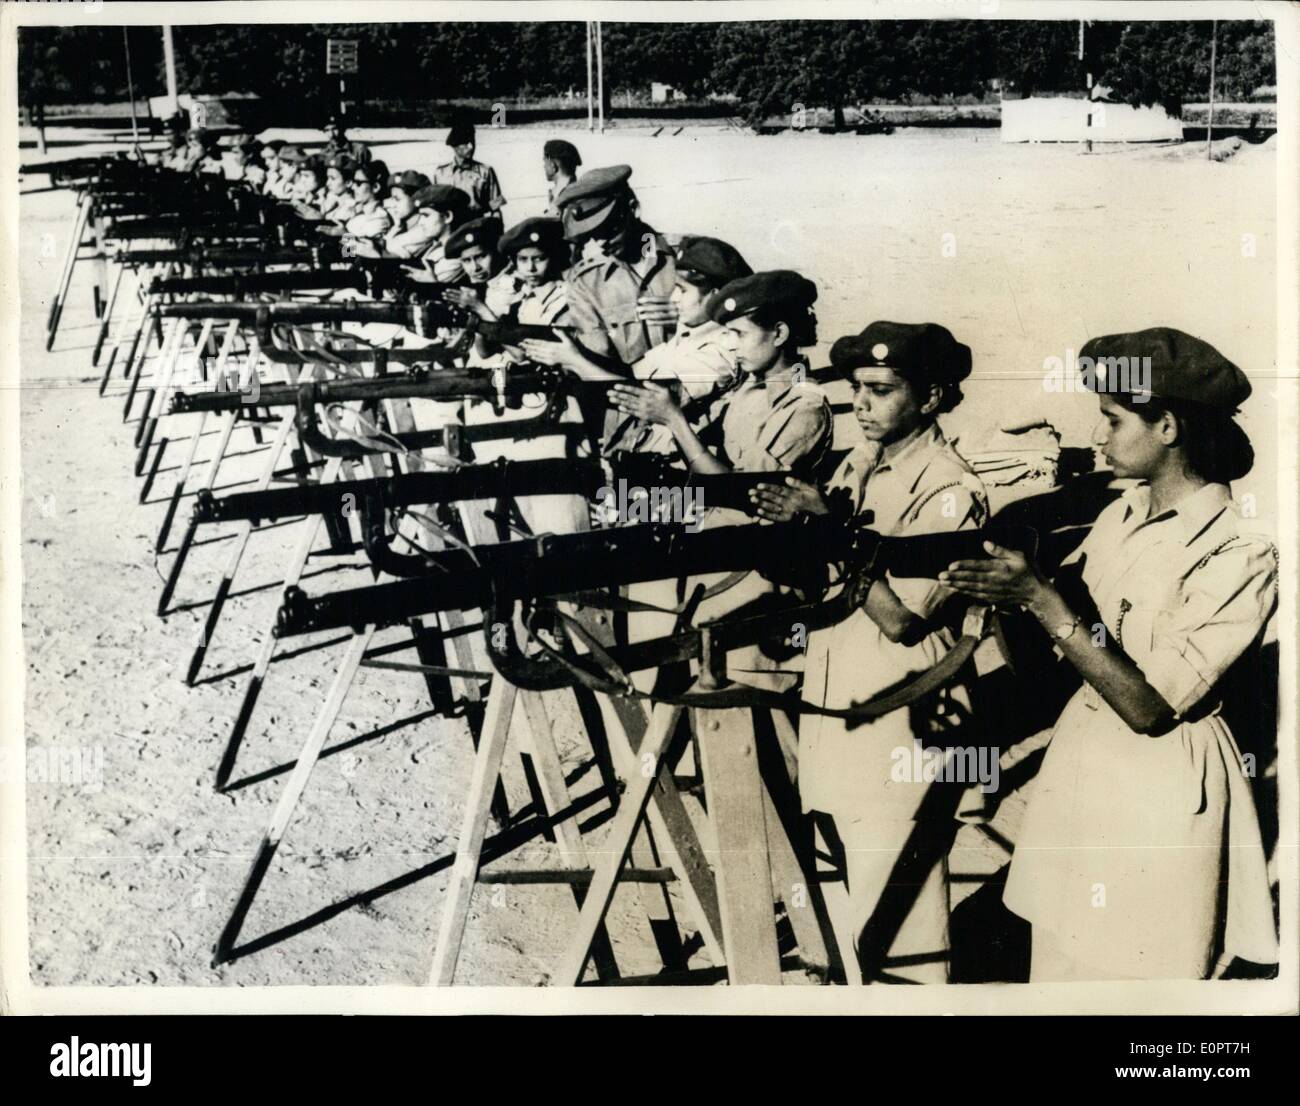 Dec. 12, 1956 - Lady Officer Cadets of The Indian Forces At Rifles Practice....: Lady Officer Cadets of the Junior Wing of the Girls' Division of the National Cadet Corps of the Indian Forces are givemn instruction at Delhi Cantonment. This wing is being rauised under N.C.C.'s expanisojnm programme and the officeres un this picture have just completed their pre-commission training after a two months course in Camp. recruited from various schools, they return to takle charge Junior Wing Units in their representative institution. Stock Photo